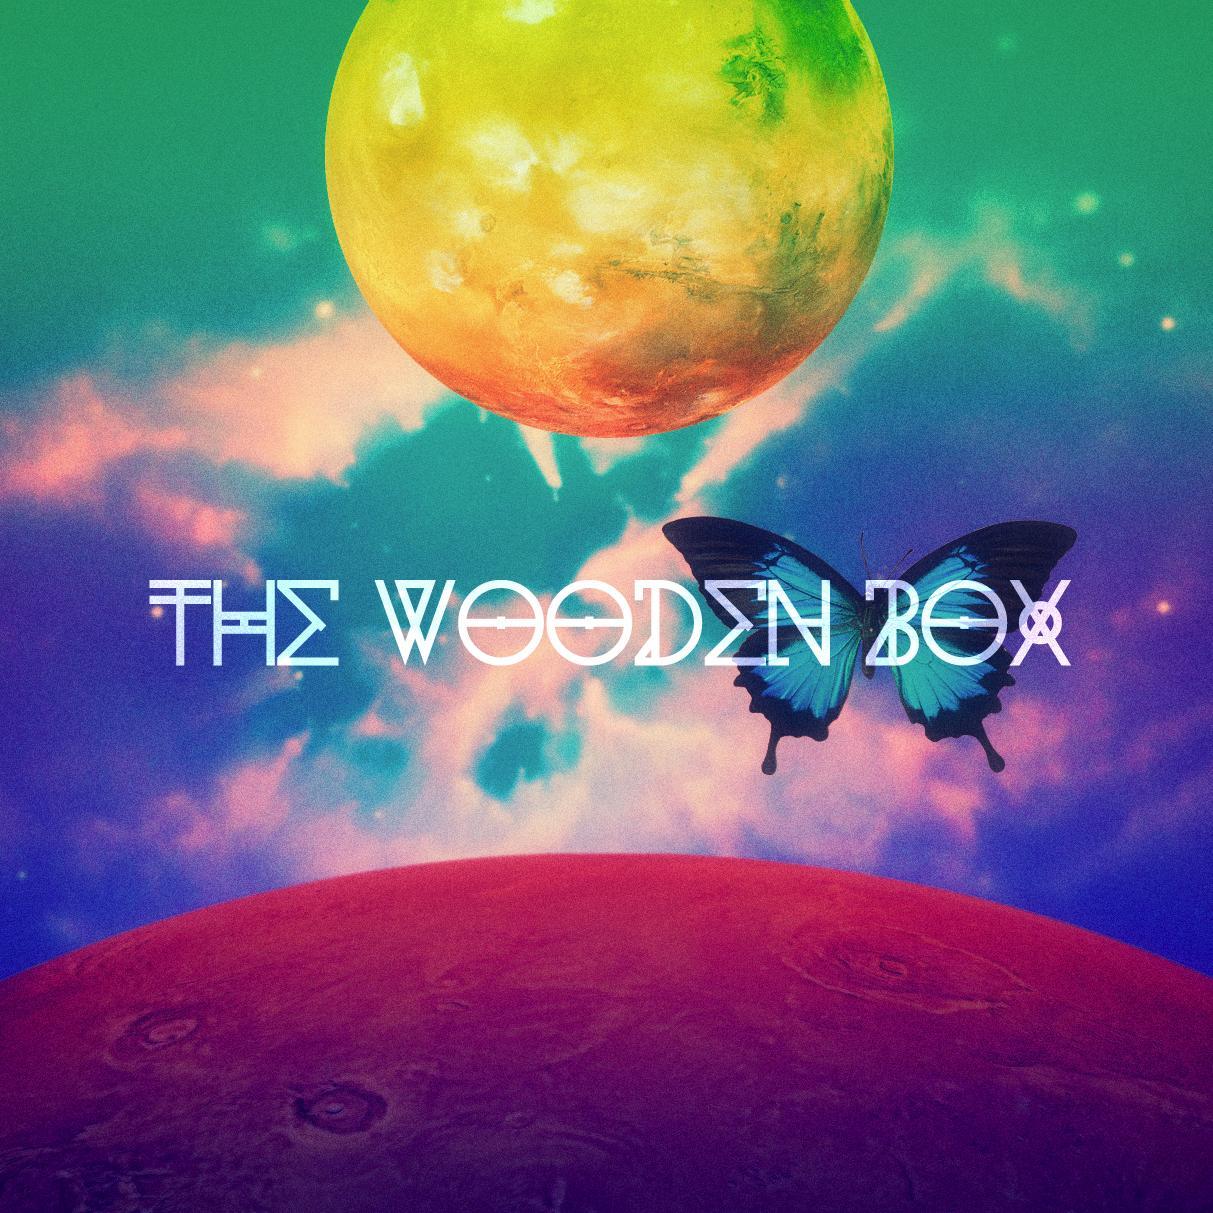 We are The Wooden Box and this is our official Twitteraccount. Check our new Single Walking Free https://t.co/MZxywfIlPJ